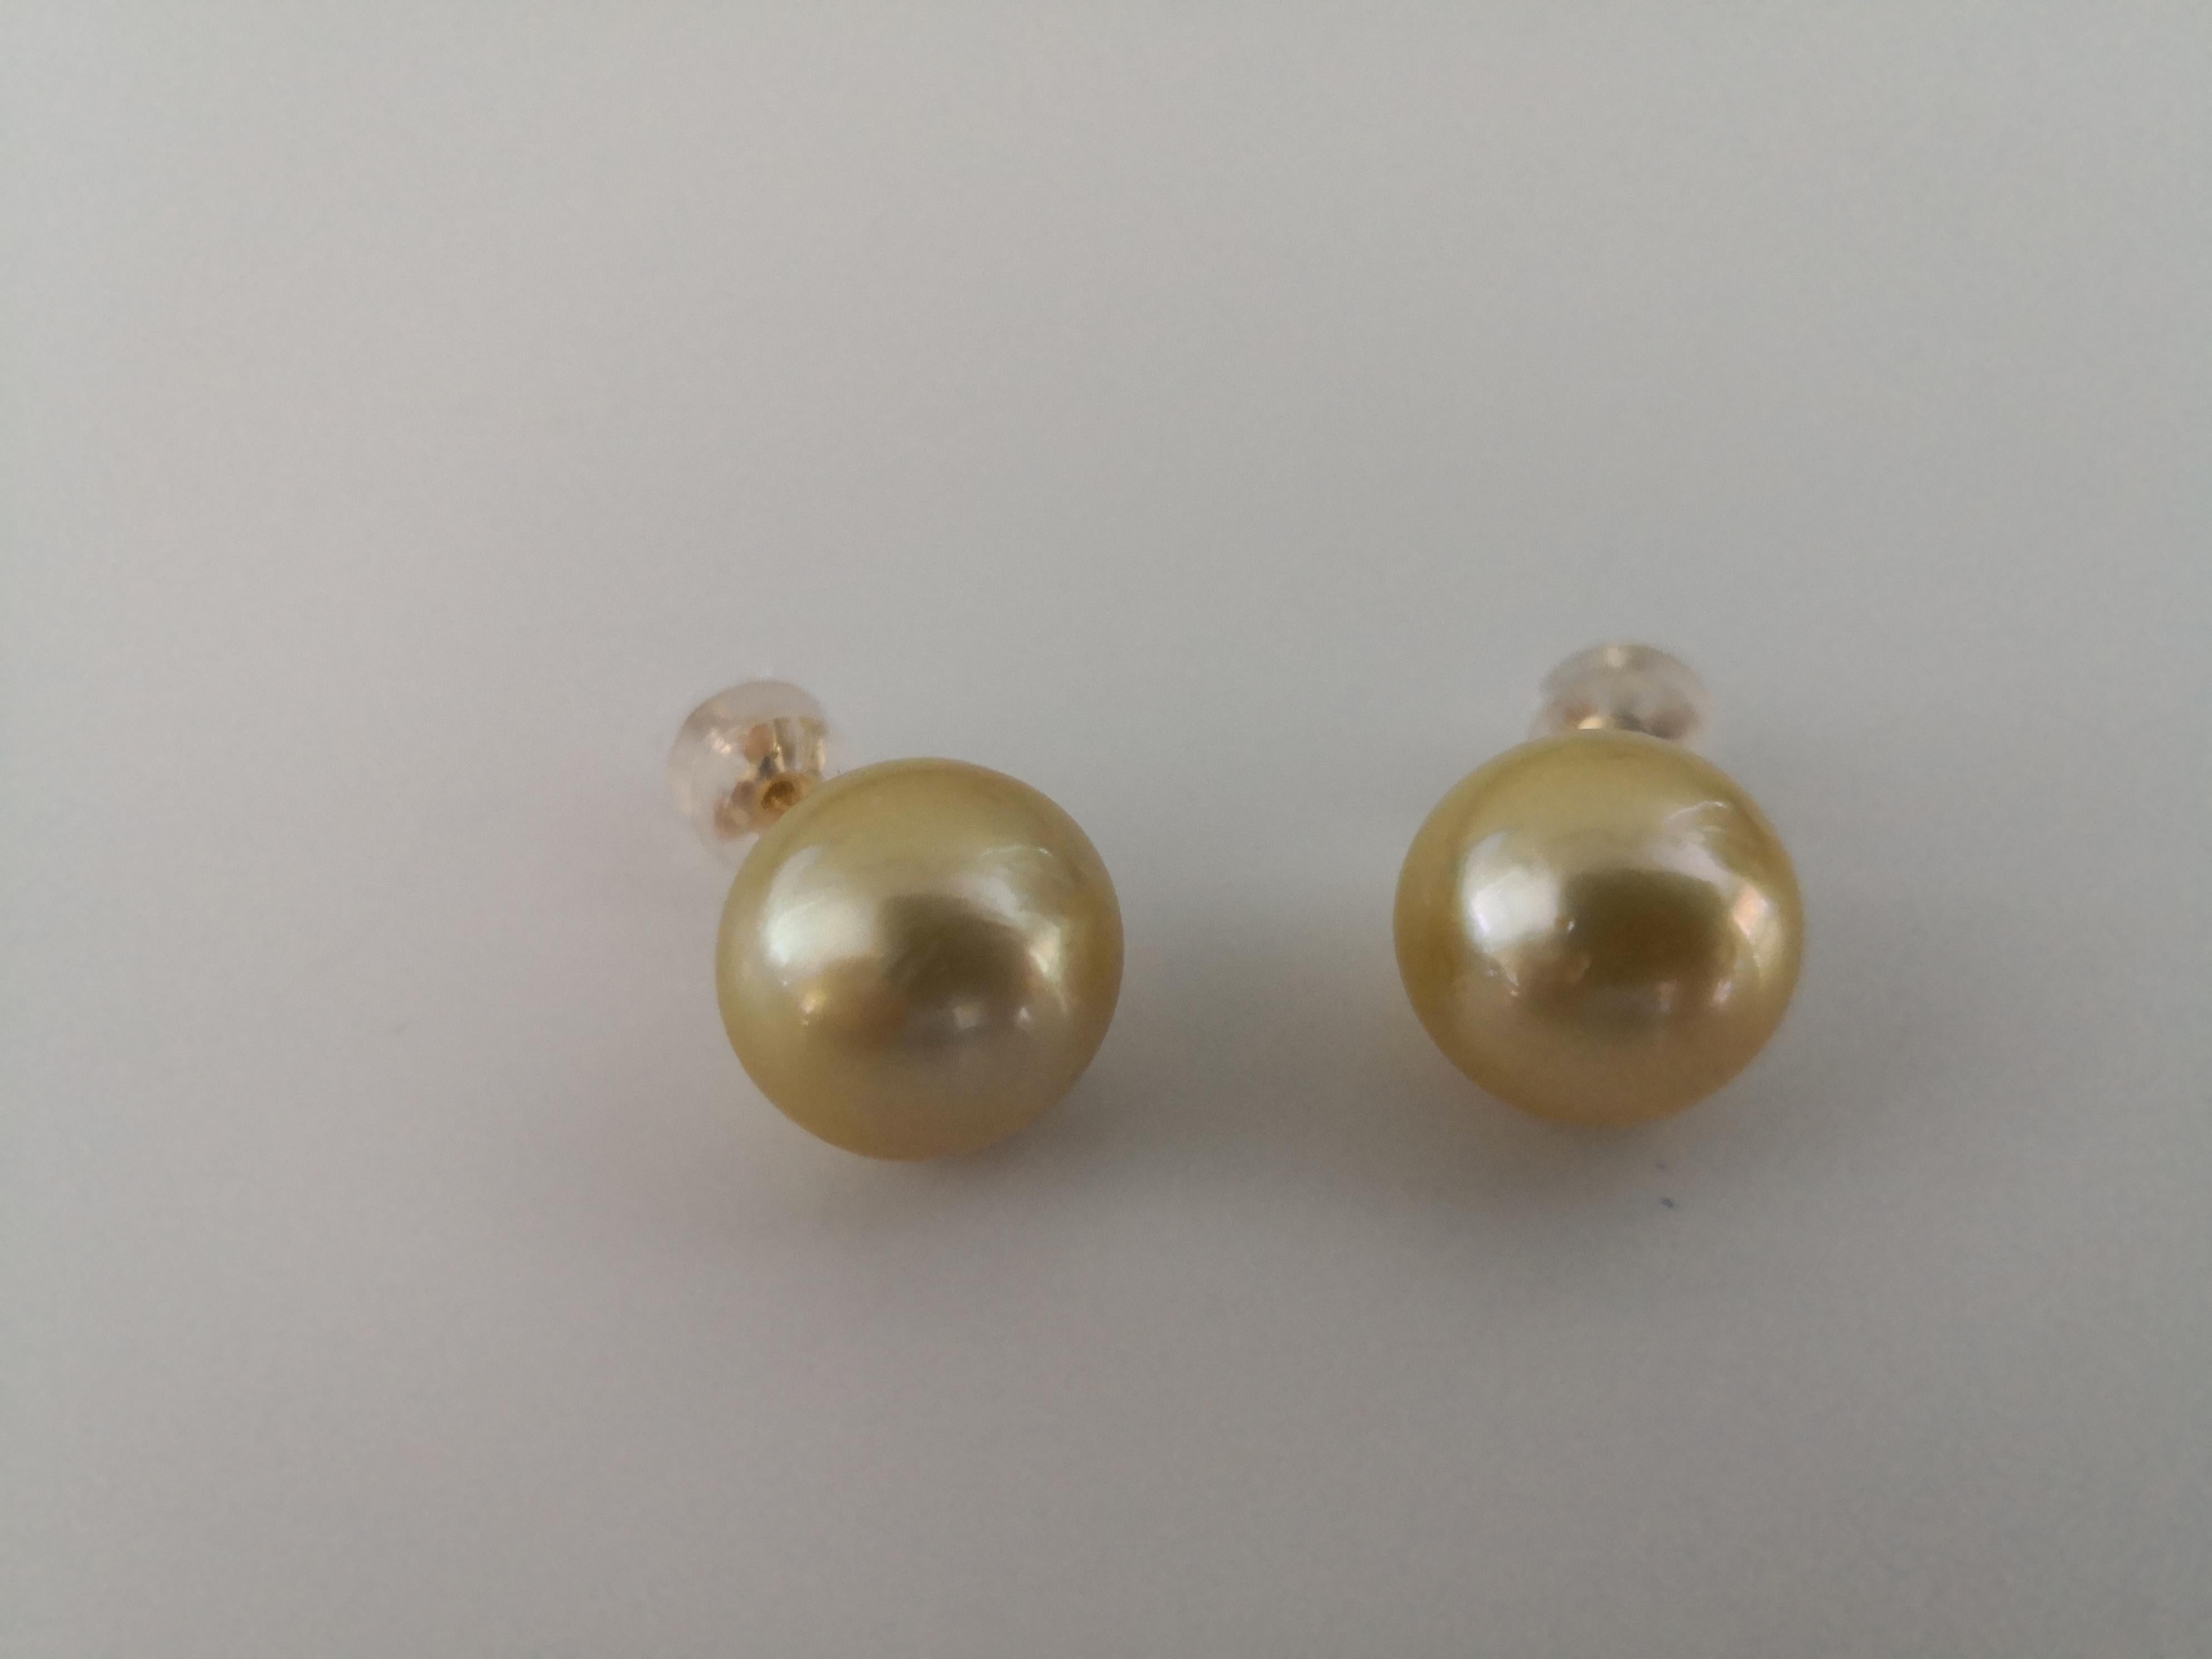 - Natural Golden Color South Sea Pearls earrings 

- Origin: Indonesia ocean waters

- Produced by Pinctada Maxima Oyster

- 18K Yellow Gold mounting 

- Size of Pearls 13 mm of diameter

- Pearls of round shape

- High natural luster and orient